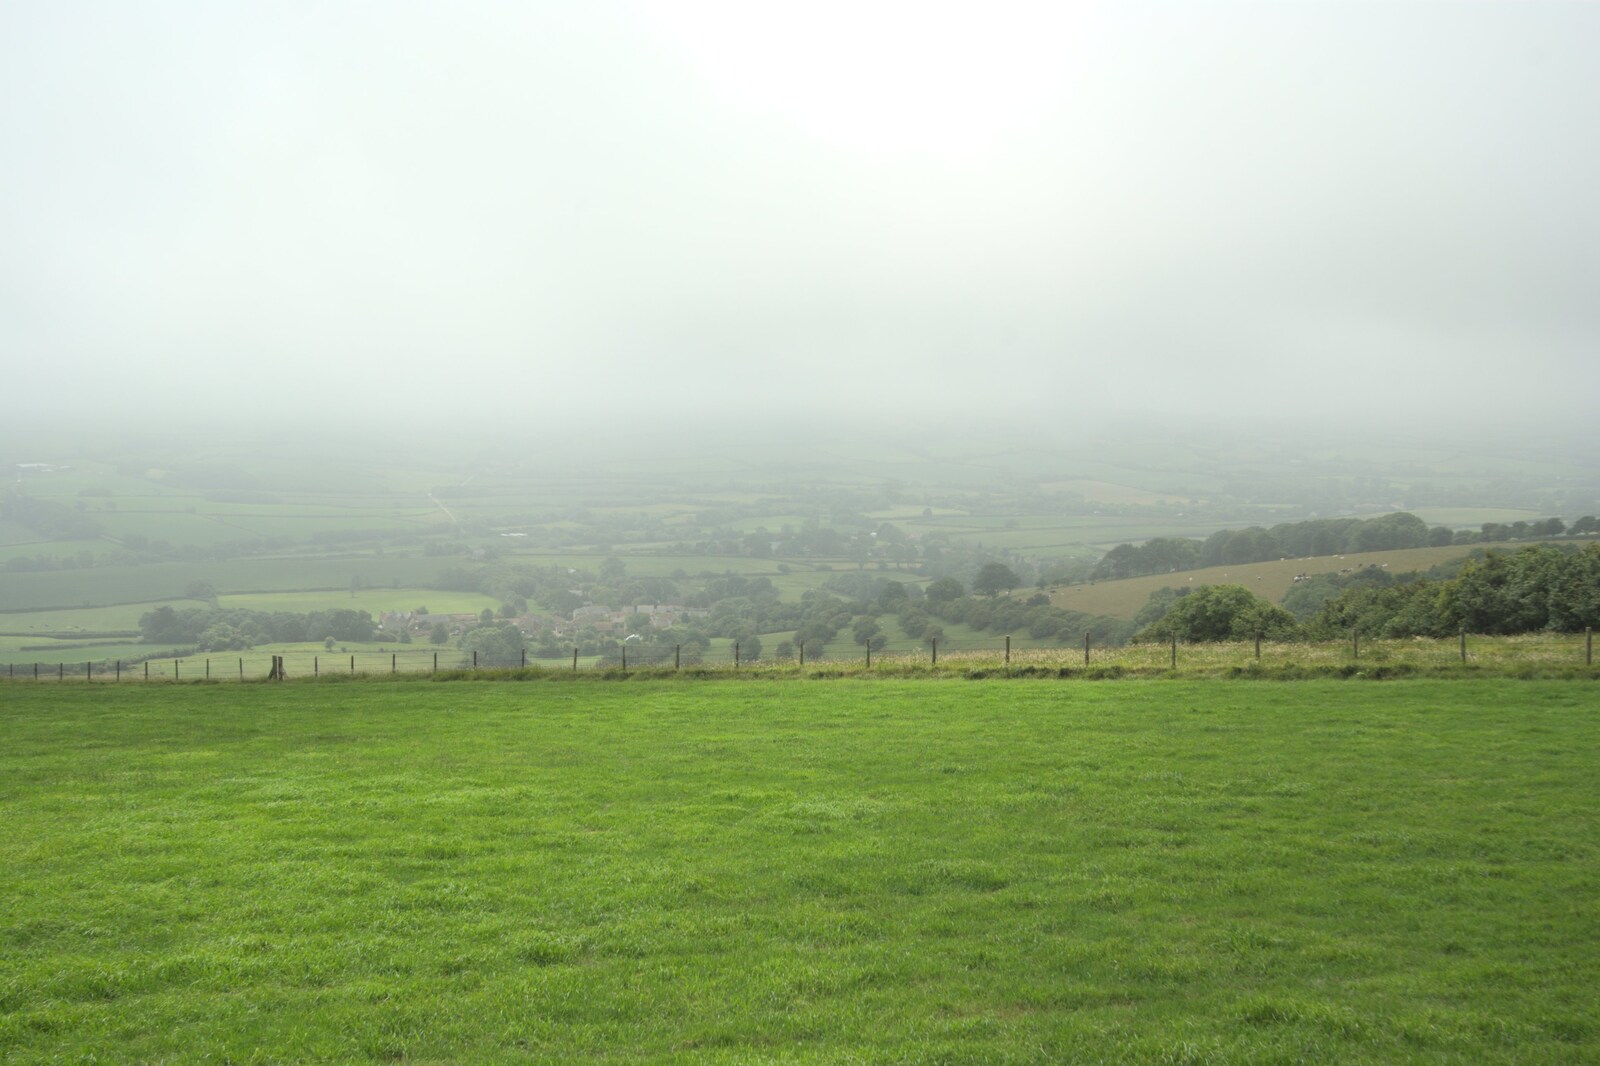 A view over the misty hills of Dorset from A Camper Van Odyssey: Charmouth, Plymouth, Dartmoor and Bath - 20th June 2011